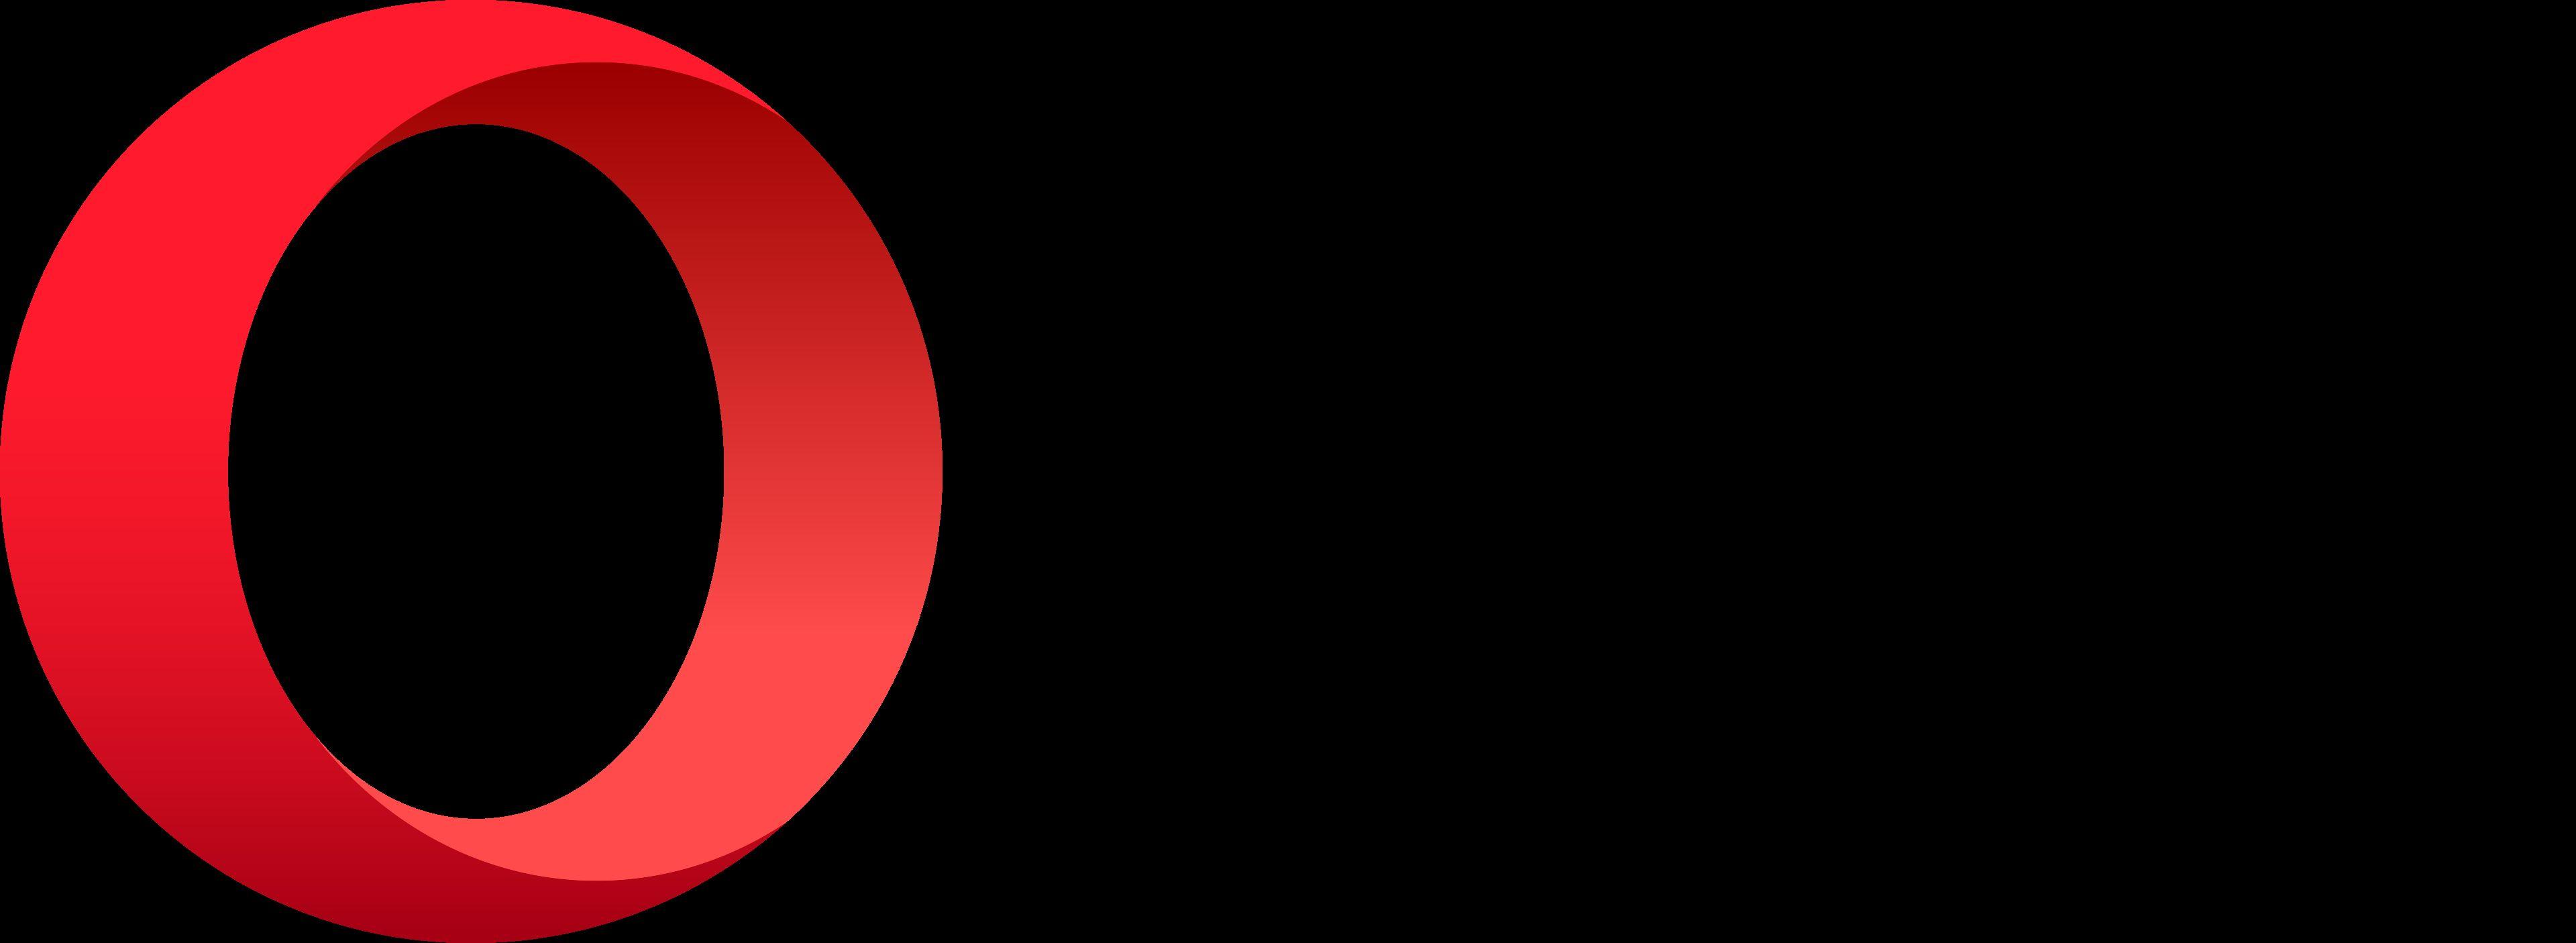 Opera Logo - Opera gets acquisition offer from Chinese consortium that includes